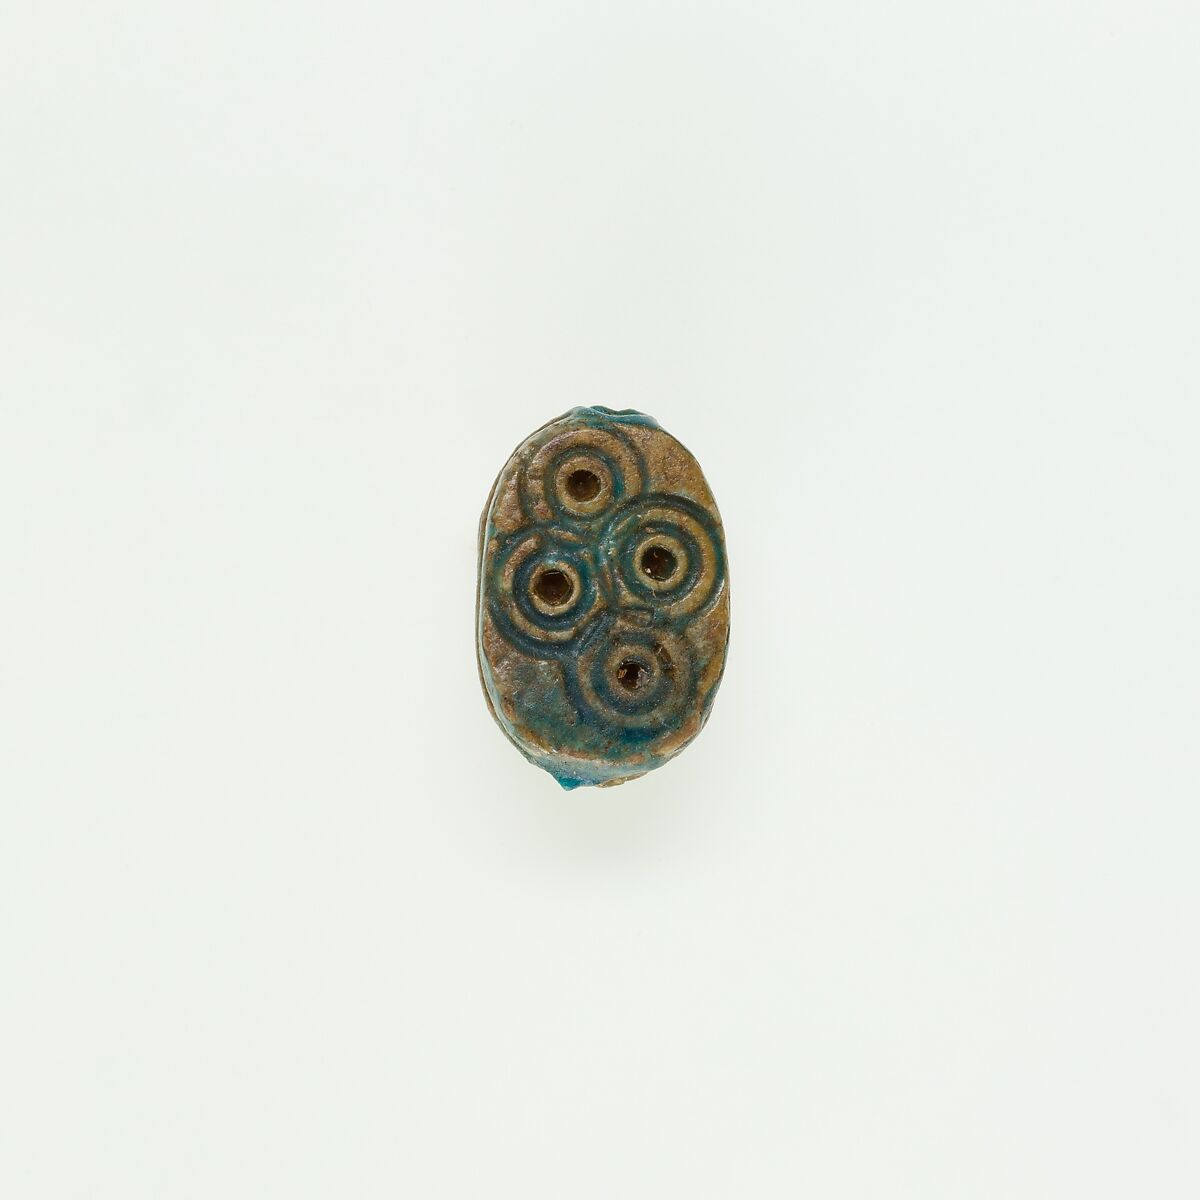 Scarab Decorated with Circles, Green glazed steatite 